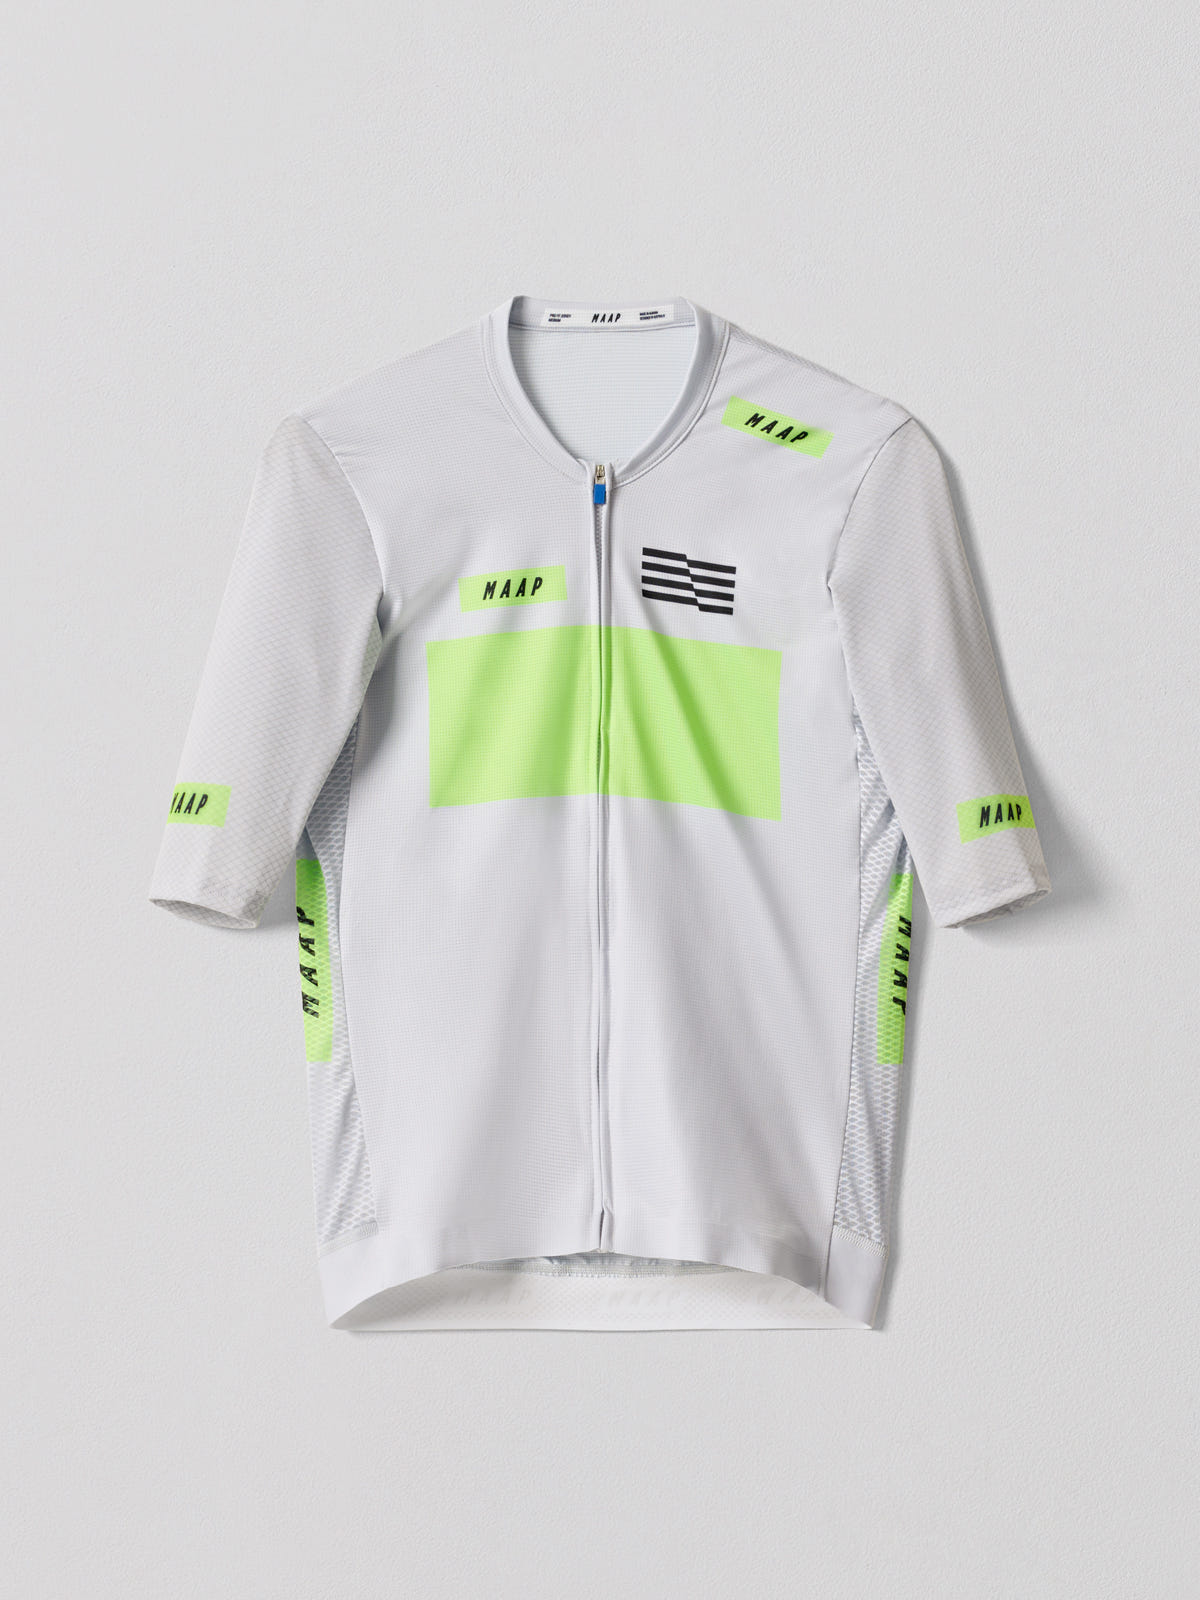 System Pro Air Jersey | MAAP US